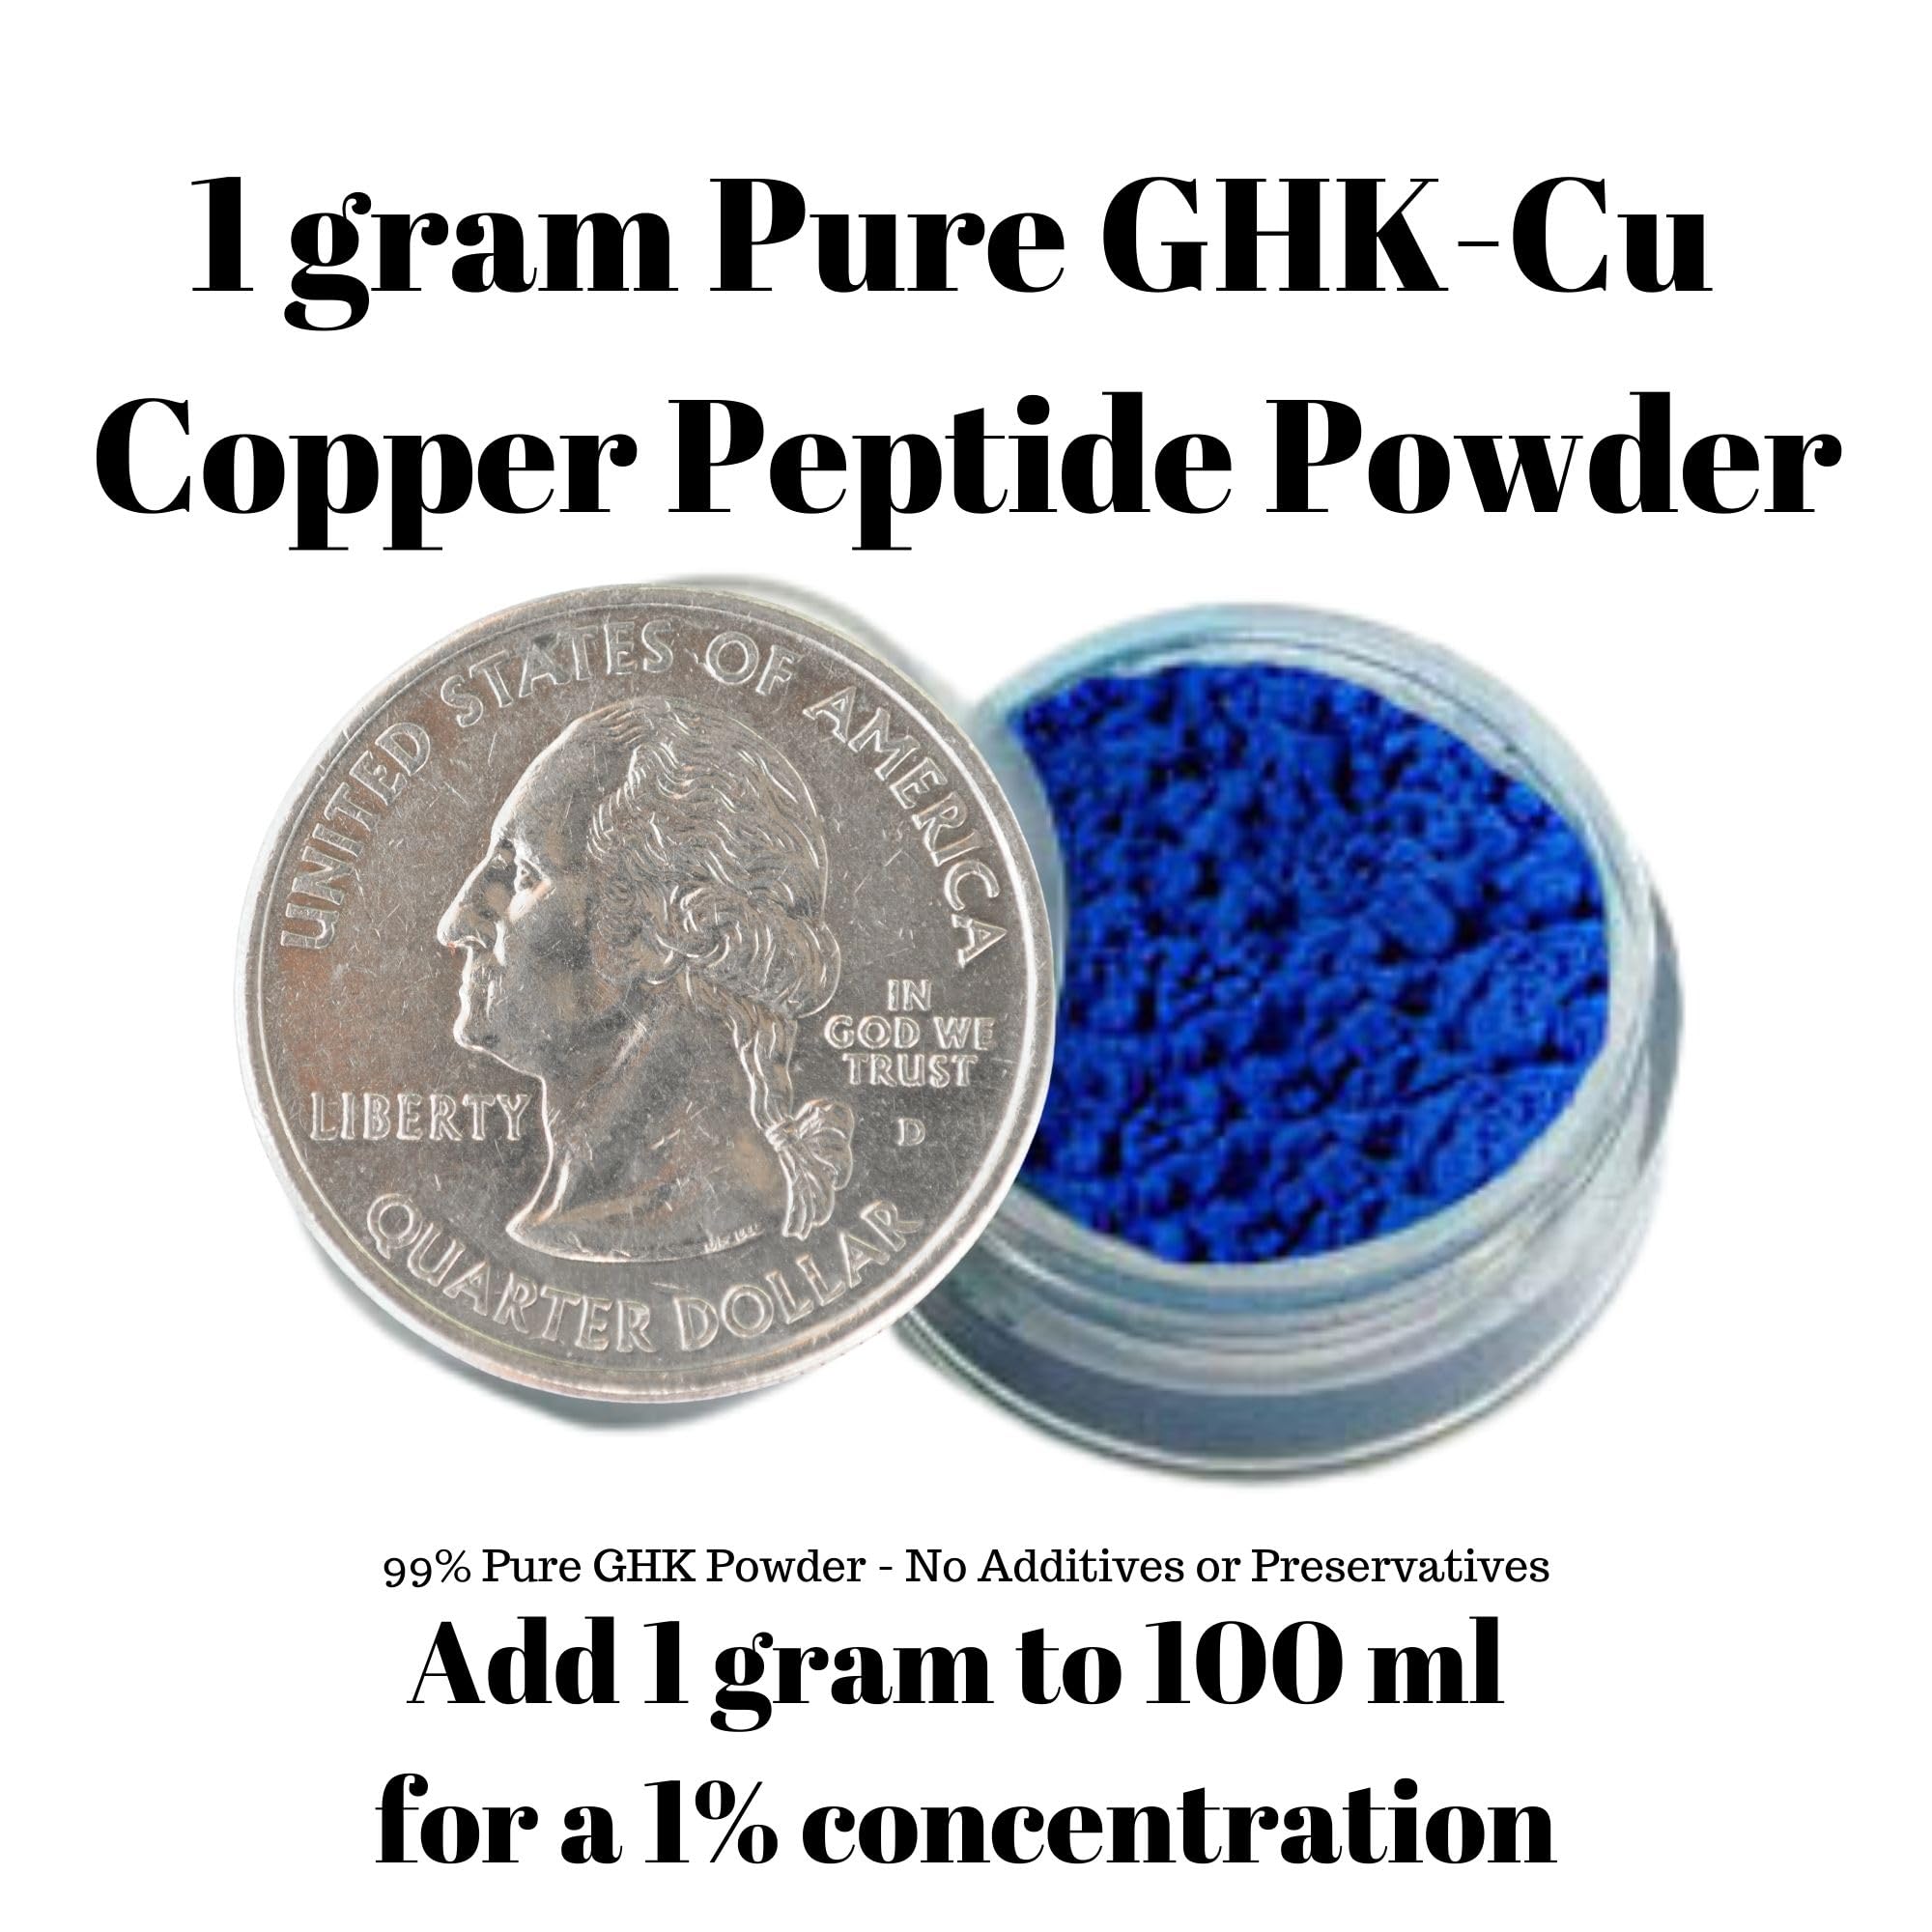 Skin Perfection GHK Copper Peptide DIY Powder for Skincare and Hair Treatment 1 Gram Jar